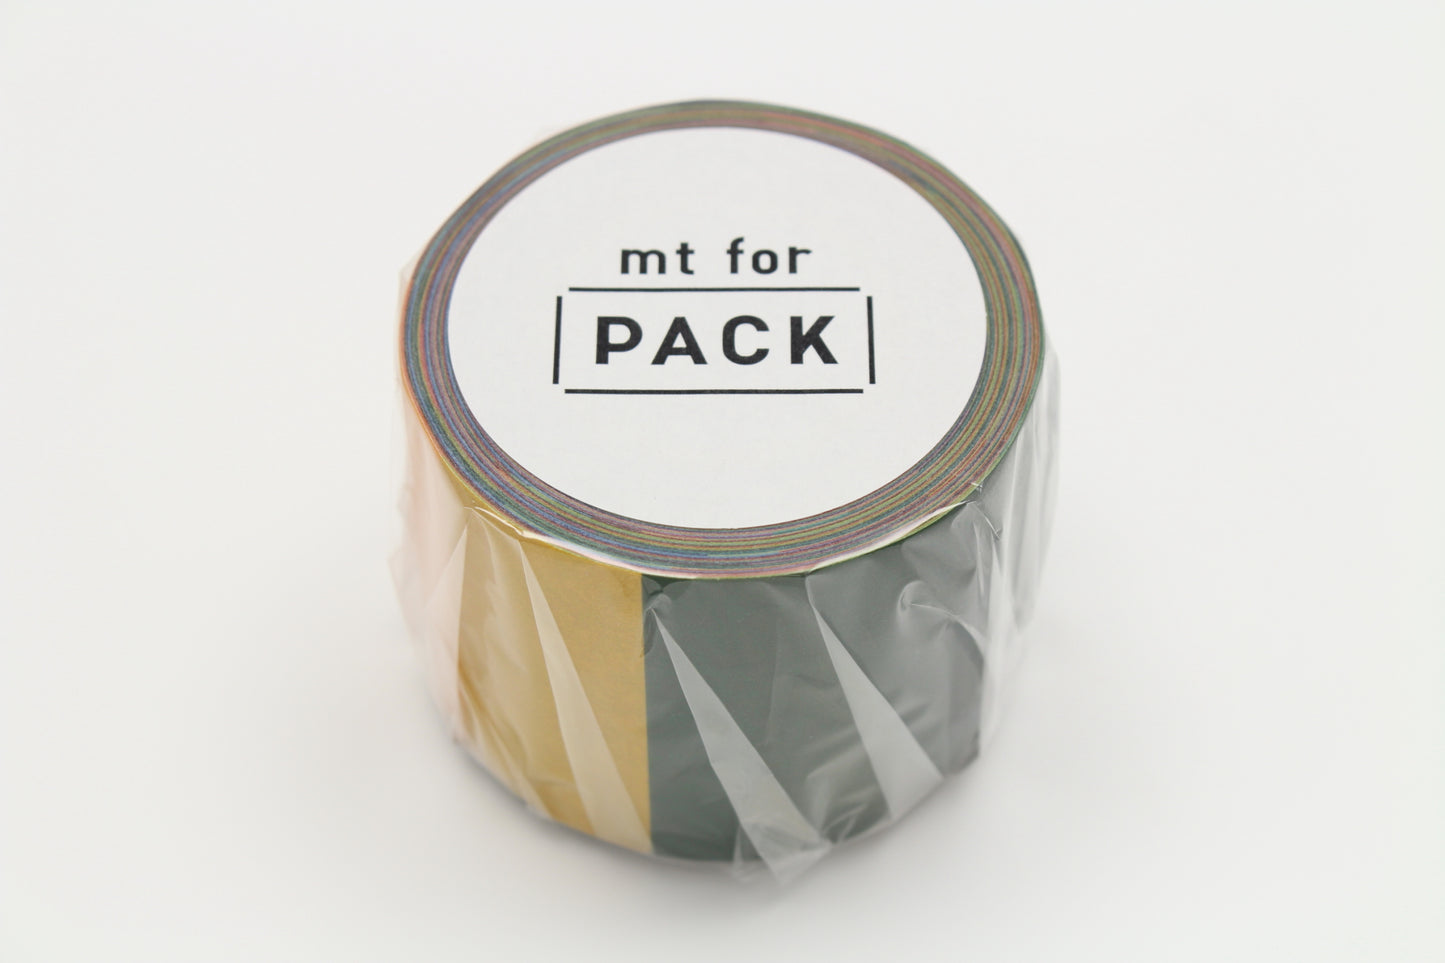 mt for pack colorful